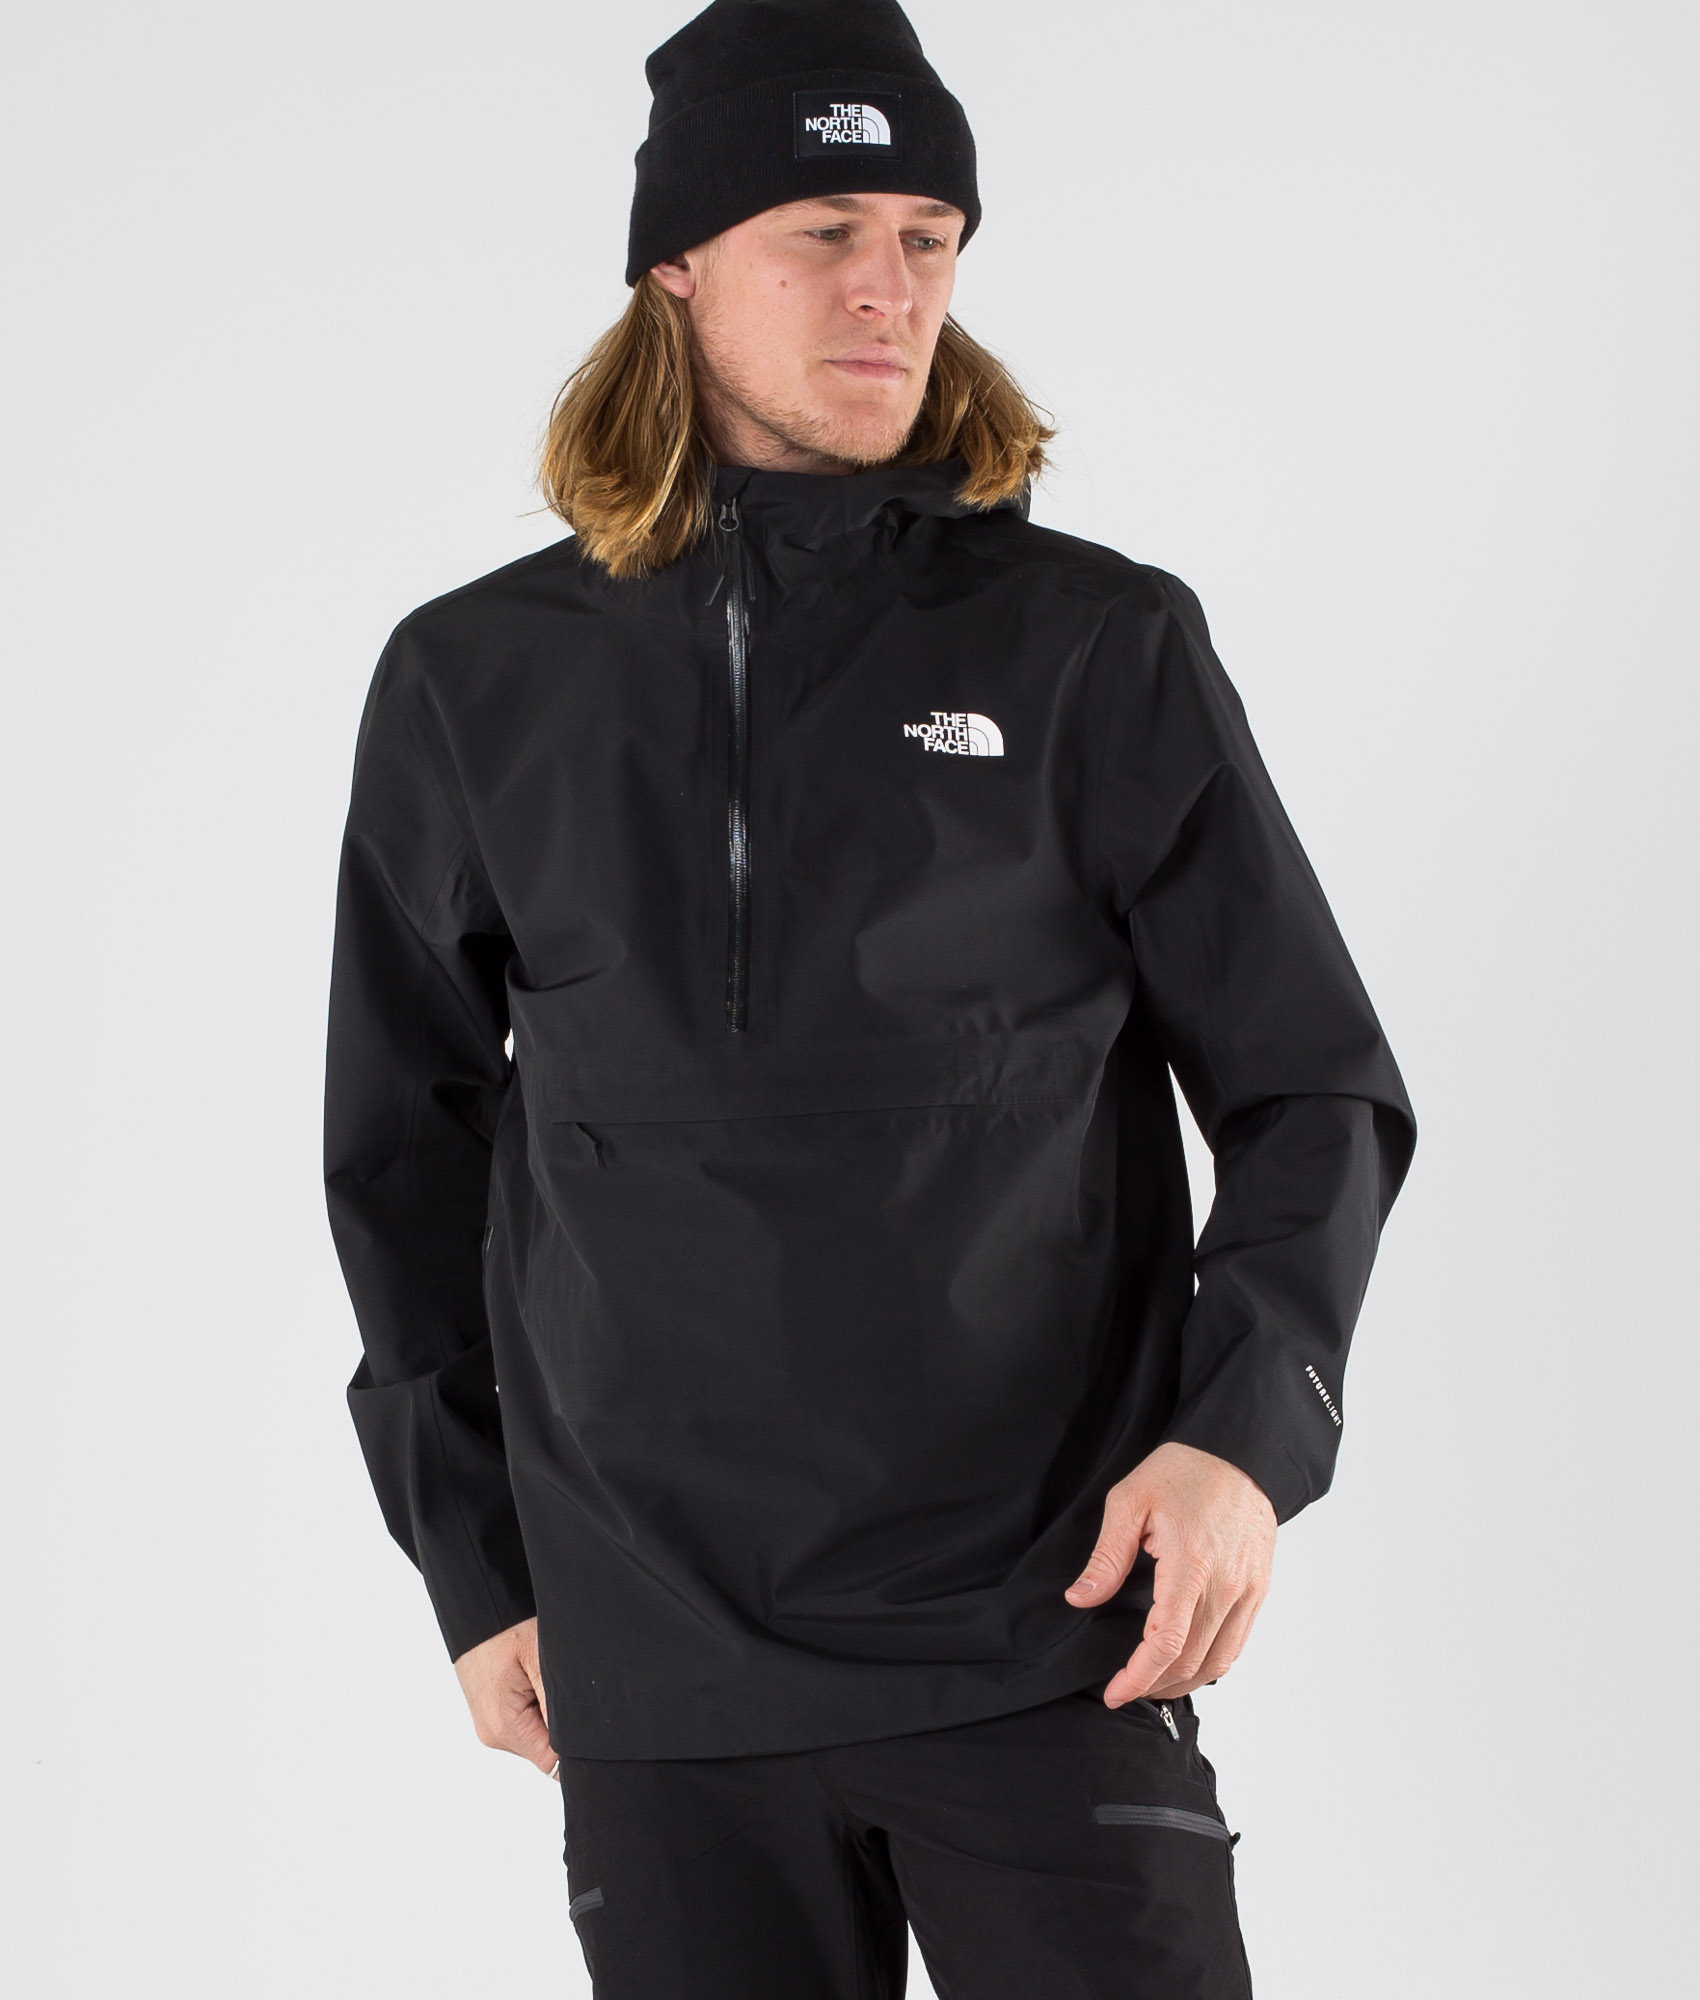 north face rain jacket with removable fleece